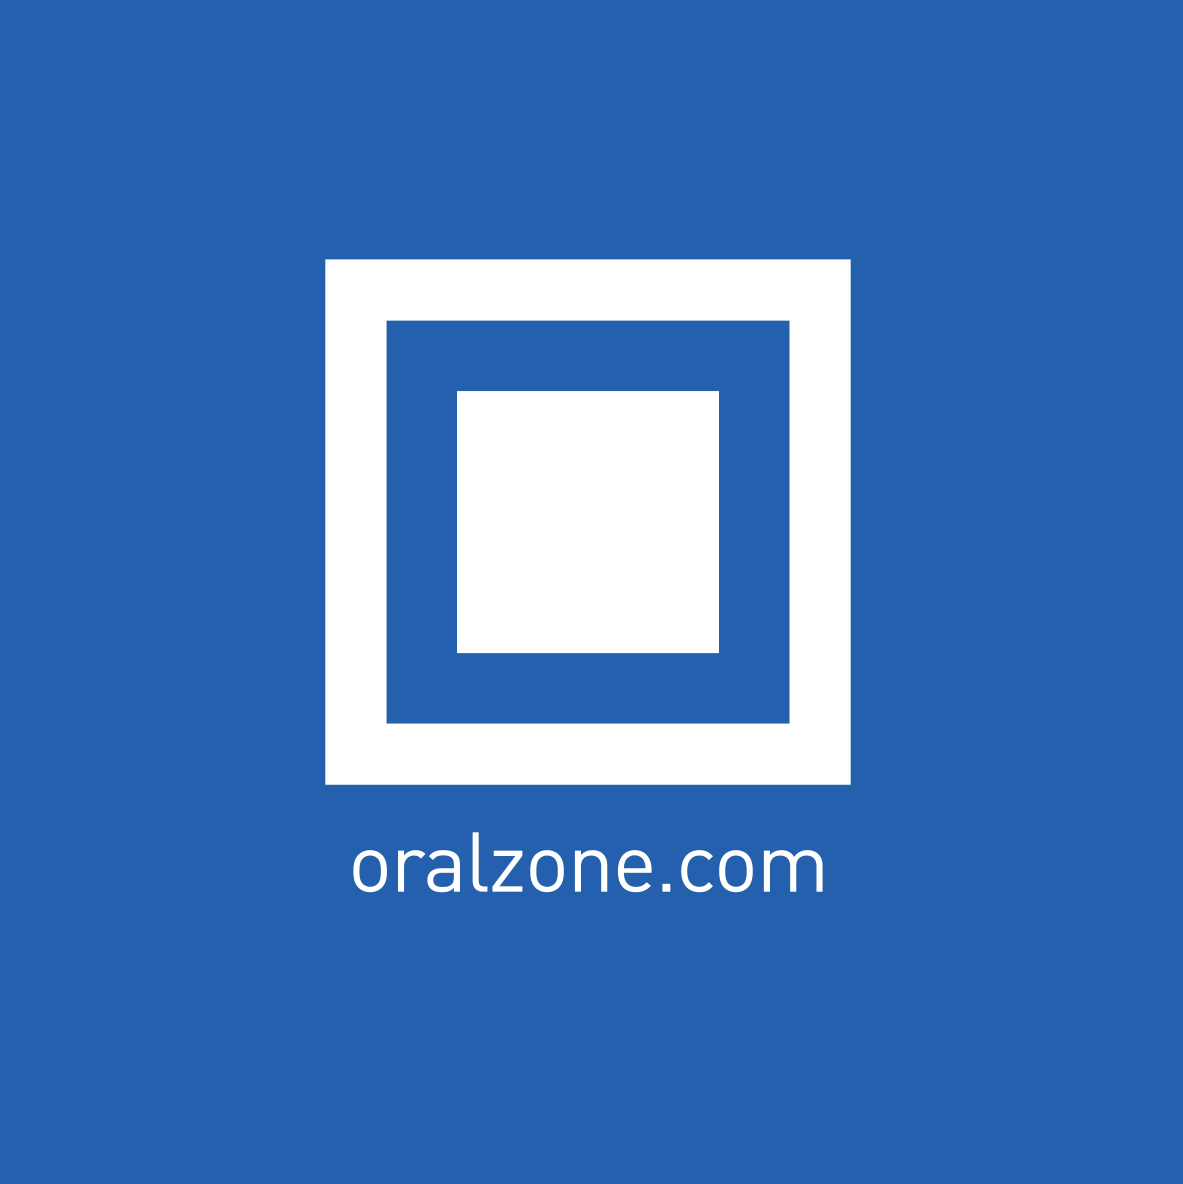 Blue square with white Oral Zone logo and the URL oralzone.com